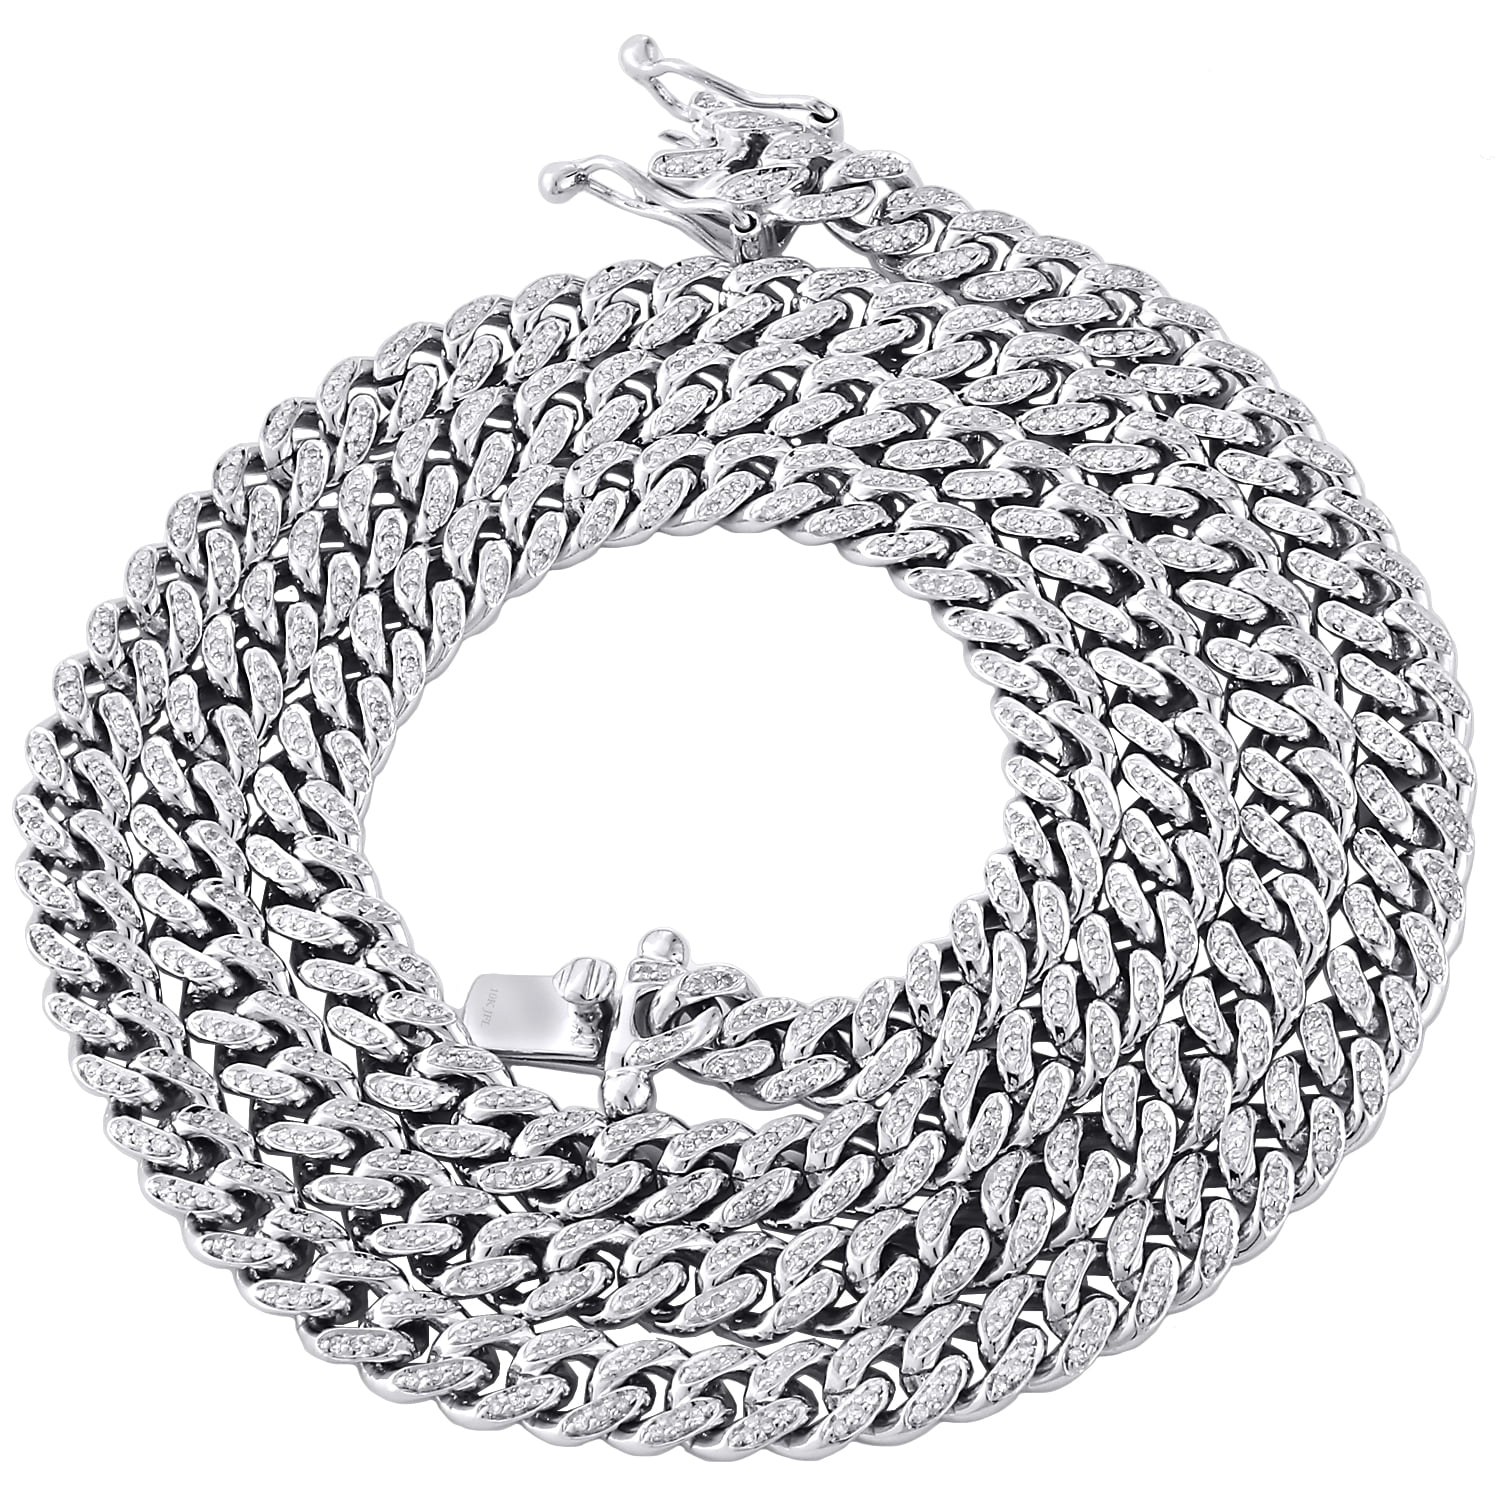 Jewel Tie Stainless Steel 6.50mm 20in Cuban Curb Chain Necklace with Secure Lobster Lock Clasp